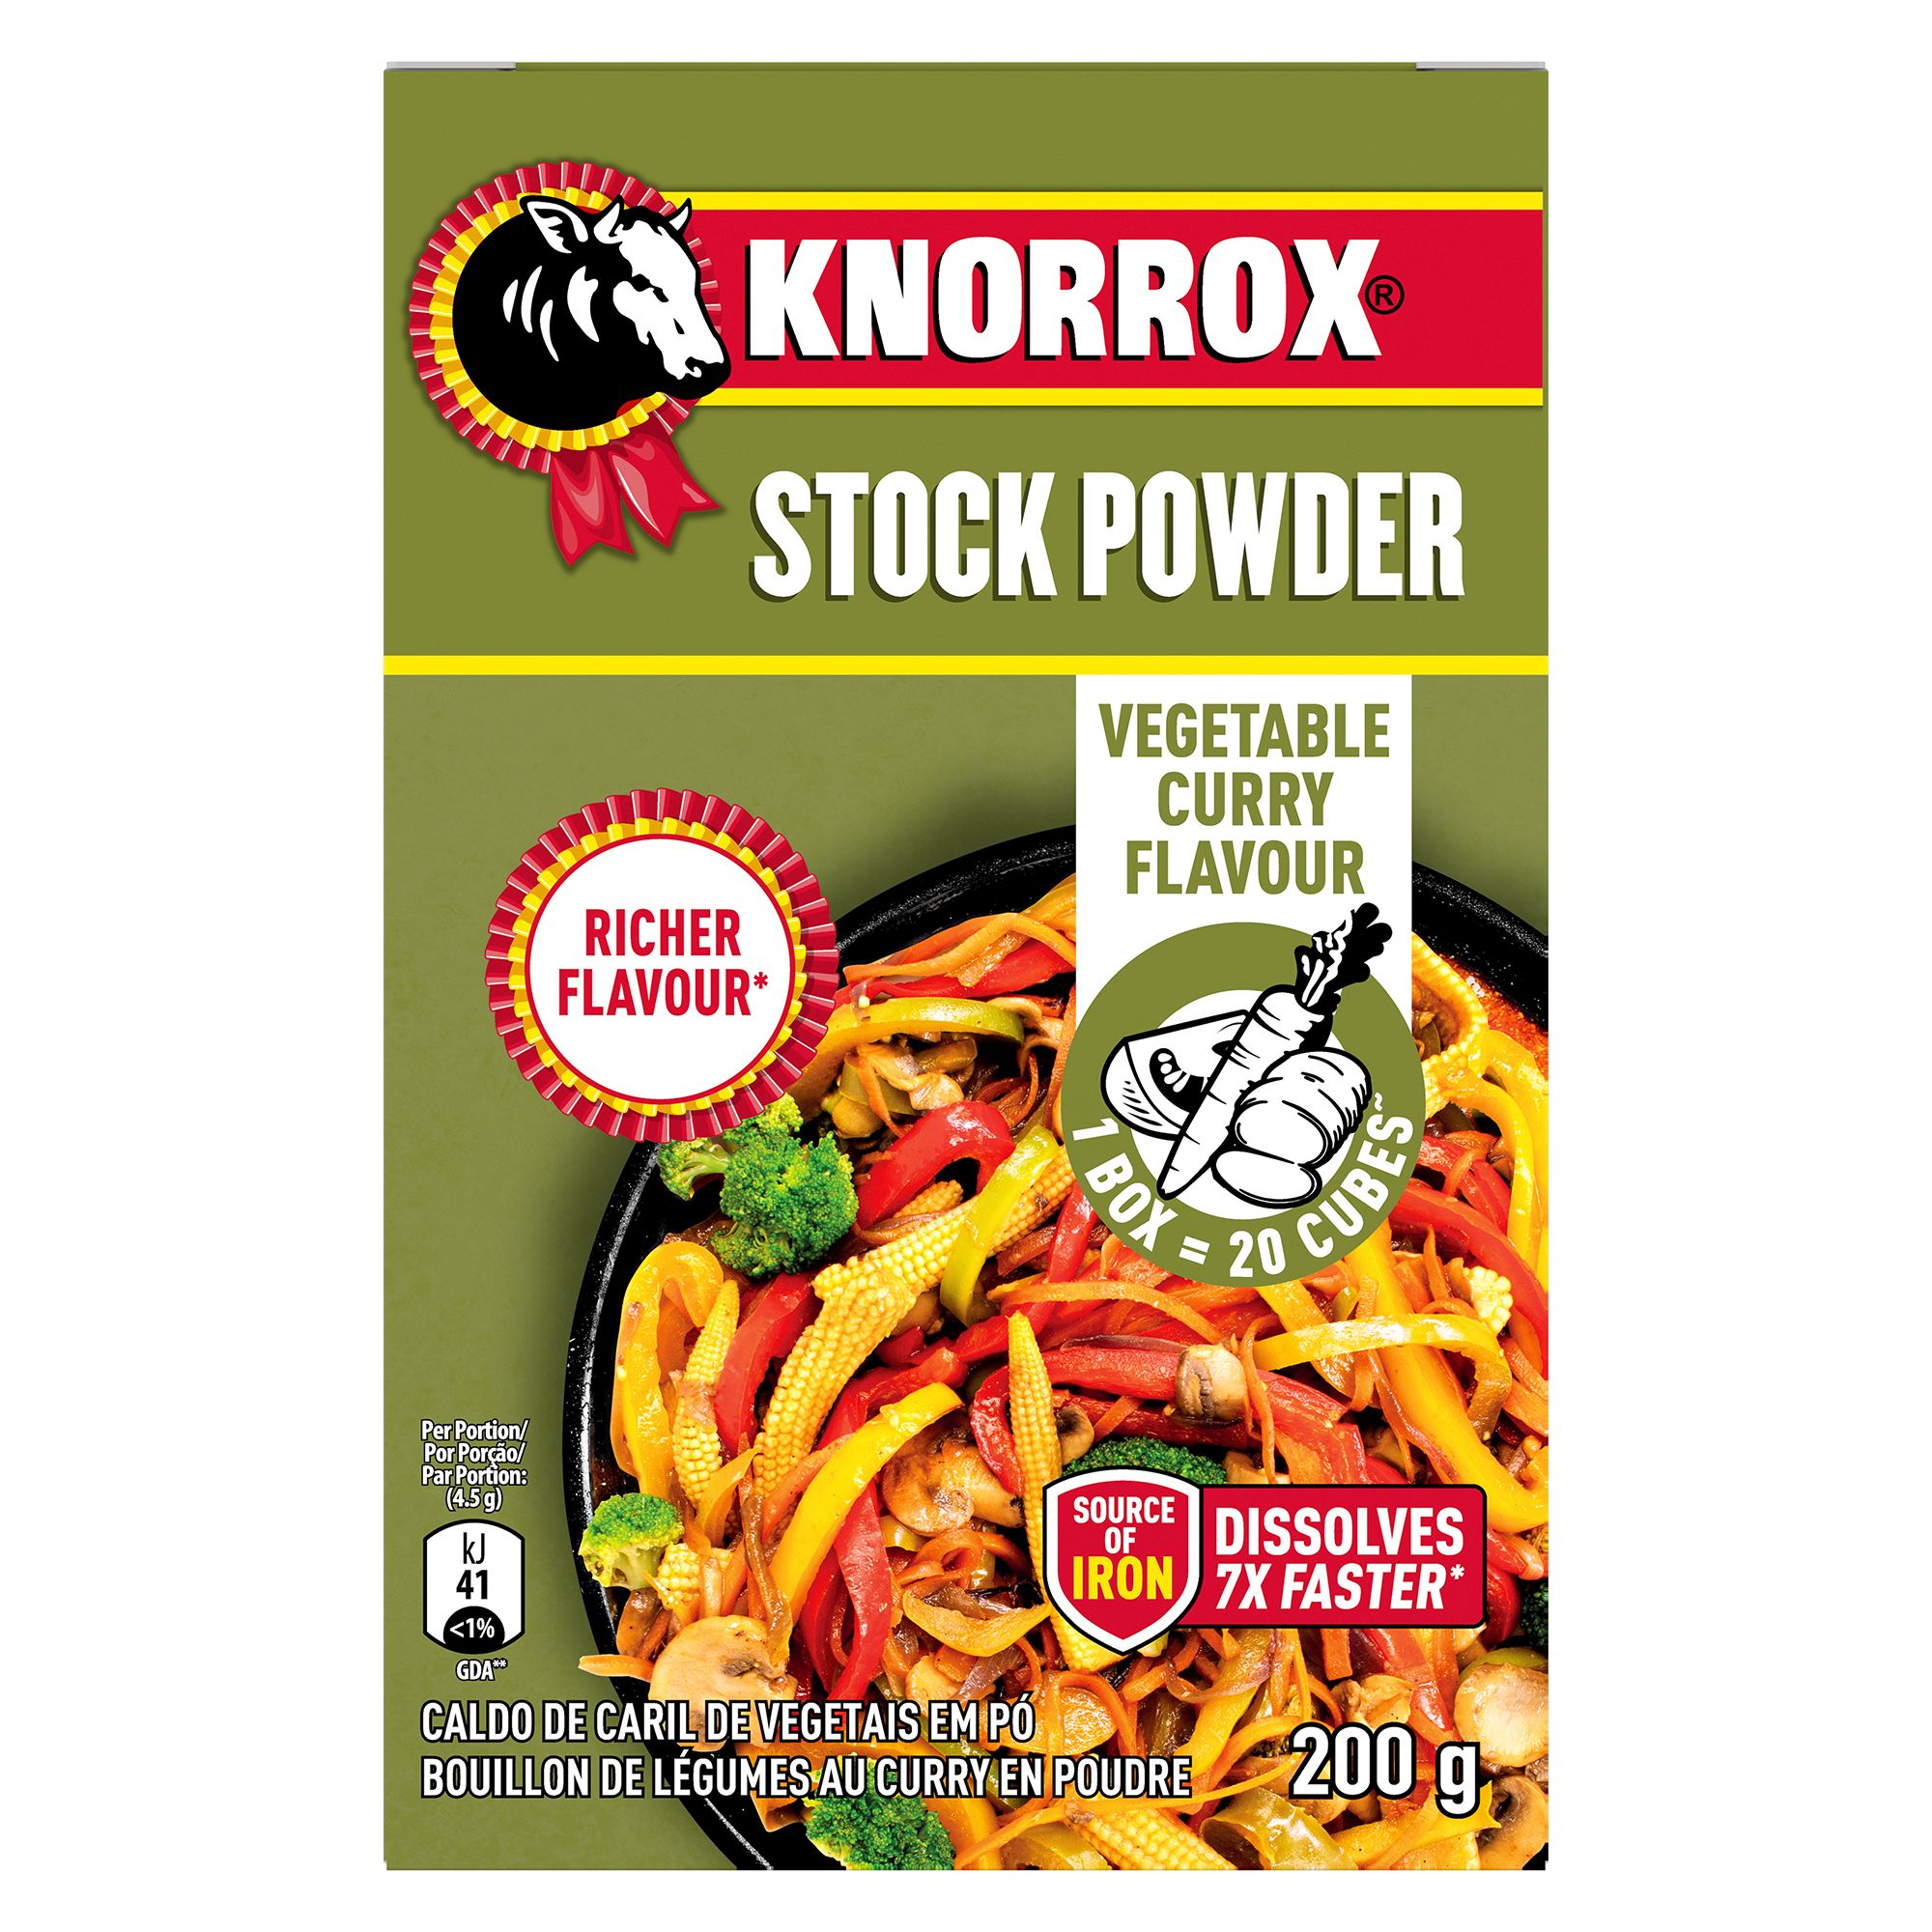 Knorrox Vegetable Curry Flavoured Stock Powder